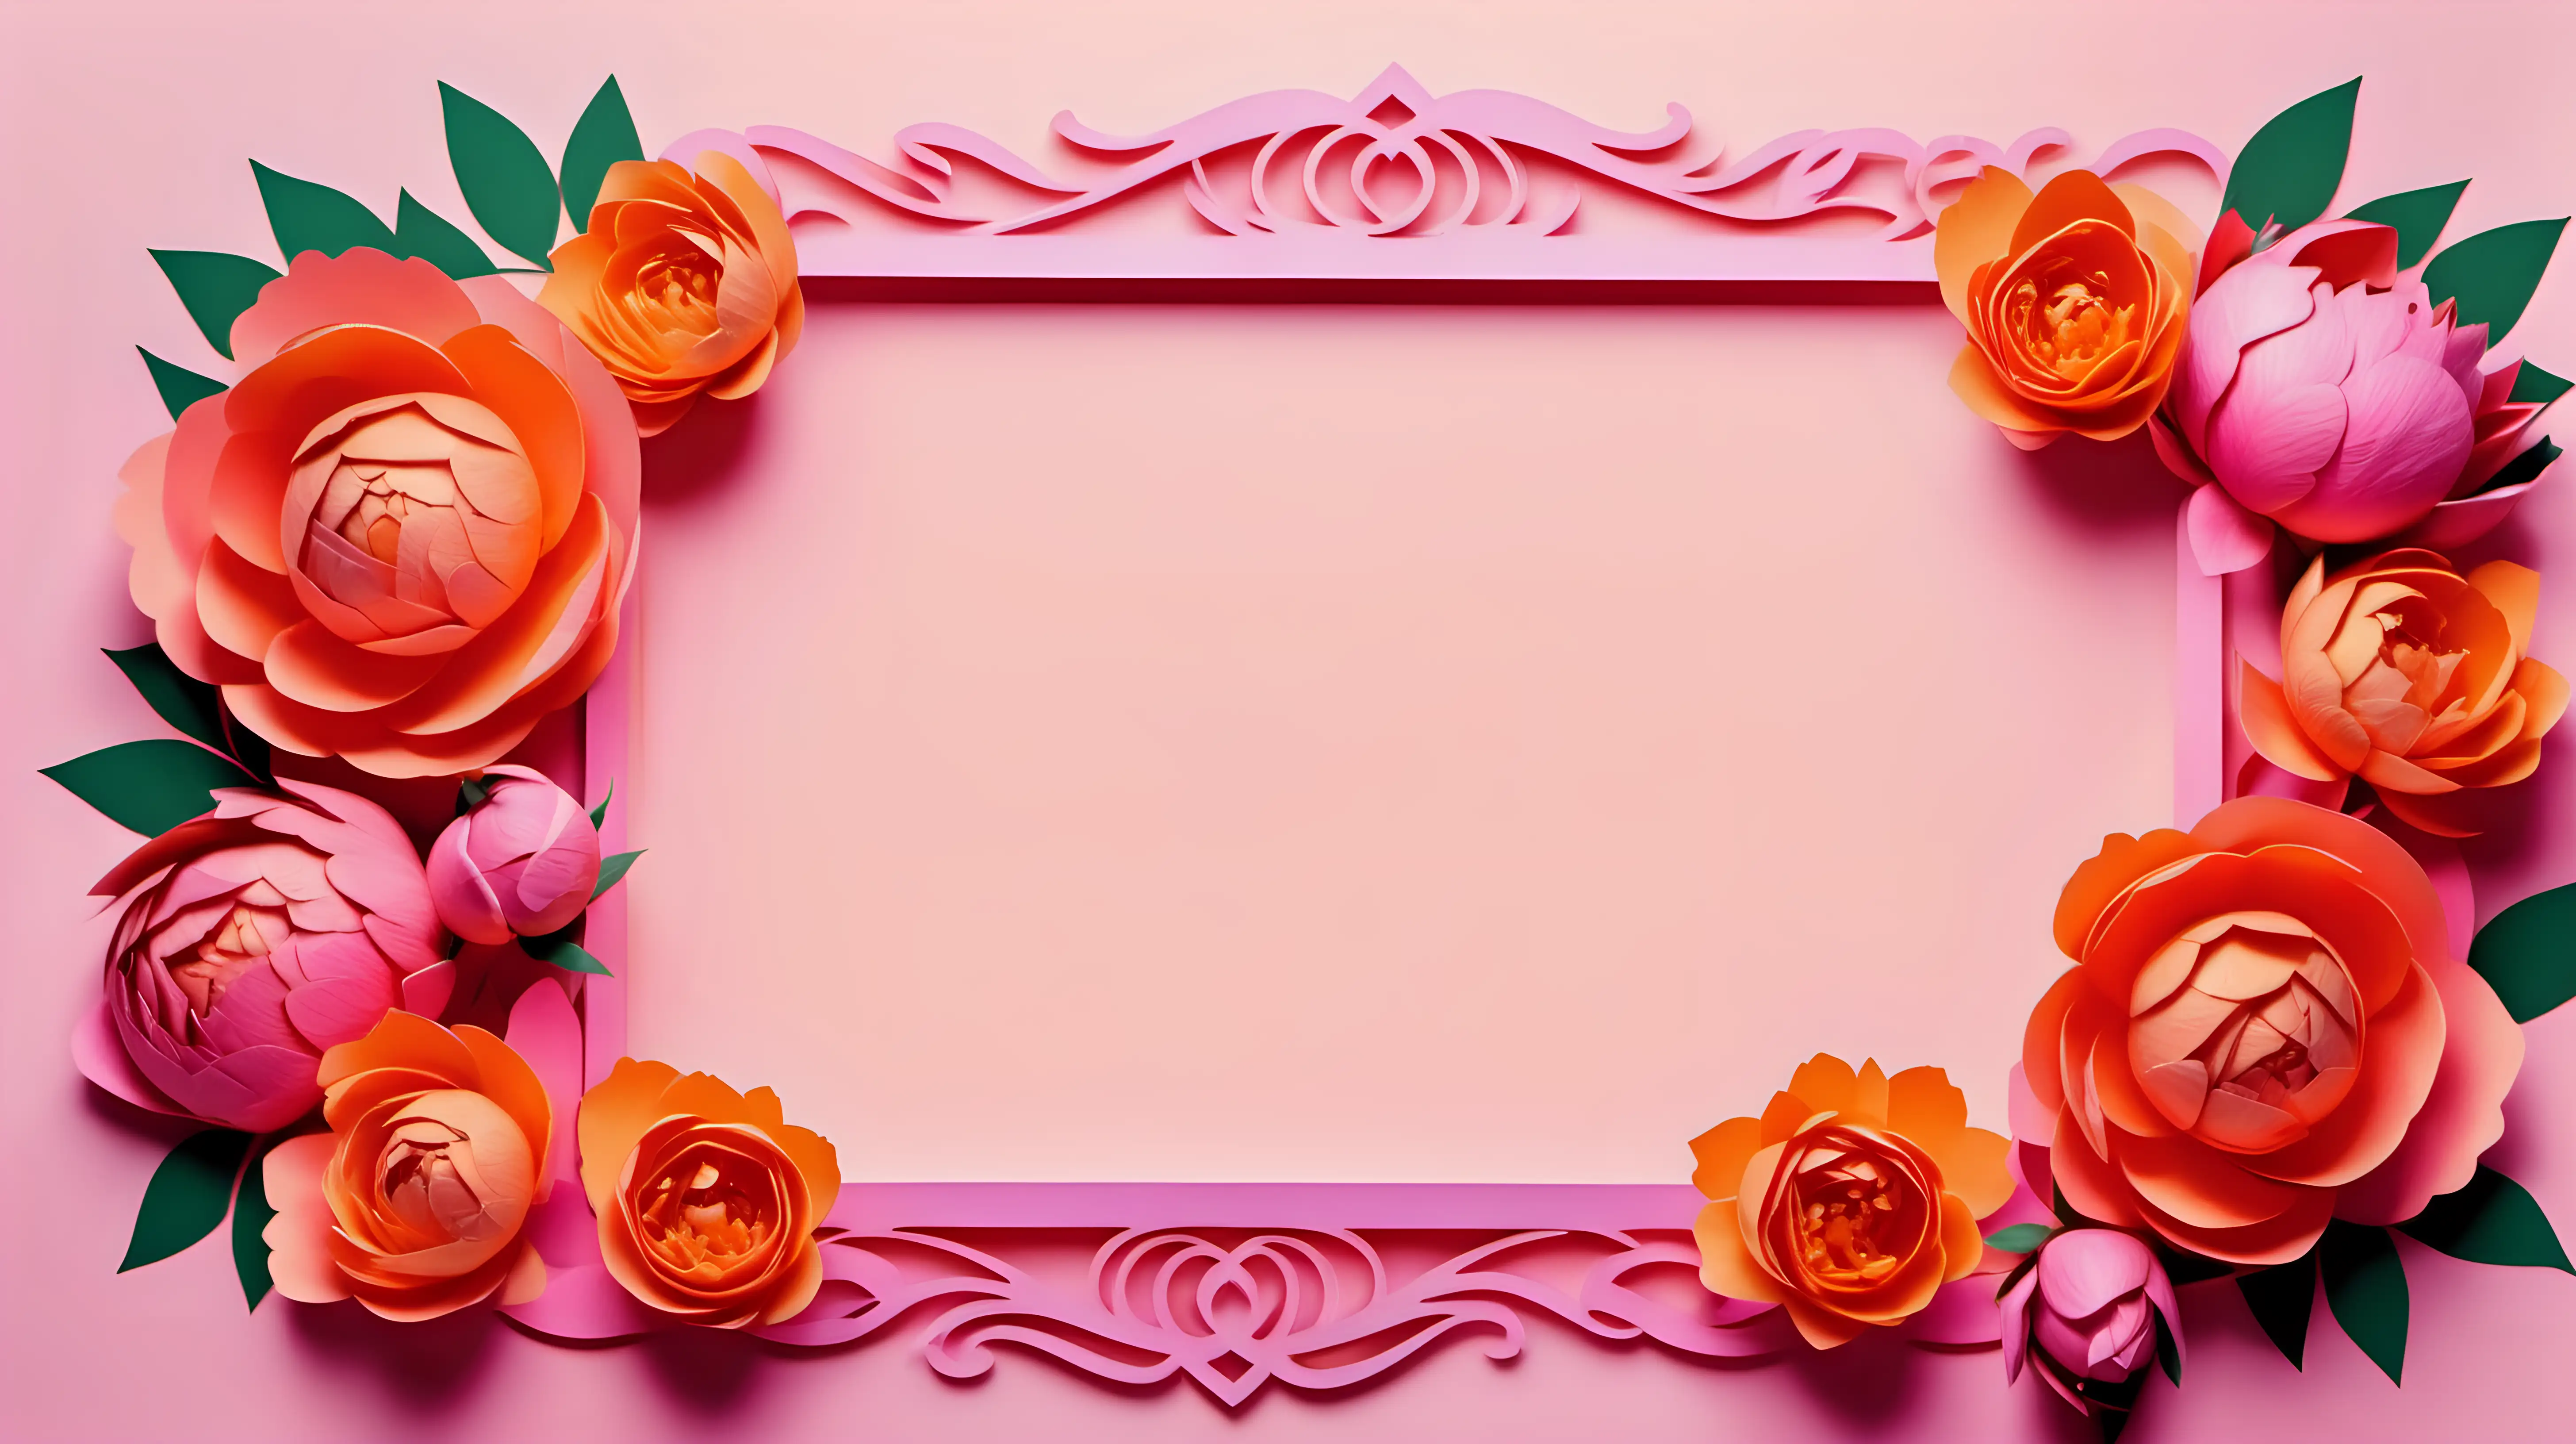 pink orange rose peony flowers frame, women's day concept, copy space, isolated on background, paper cut style